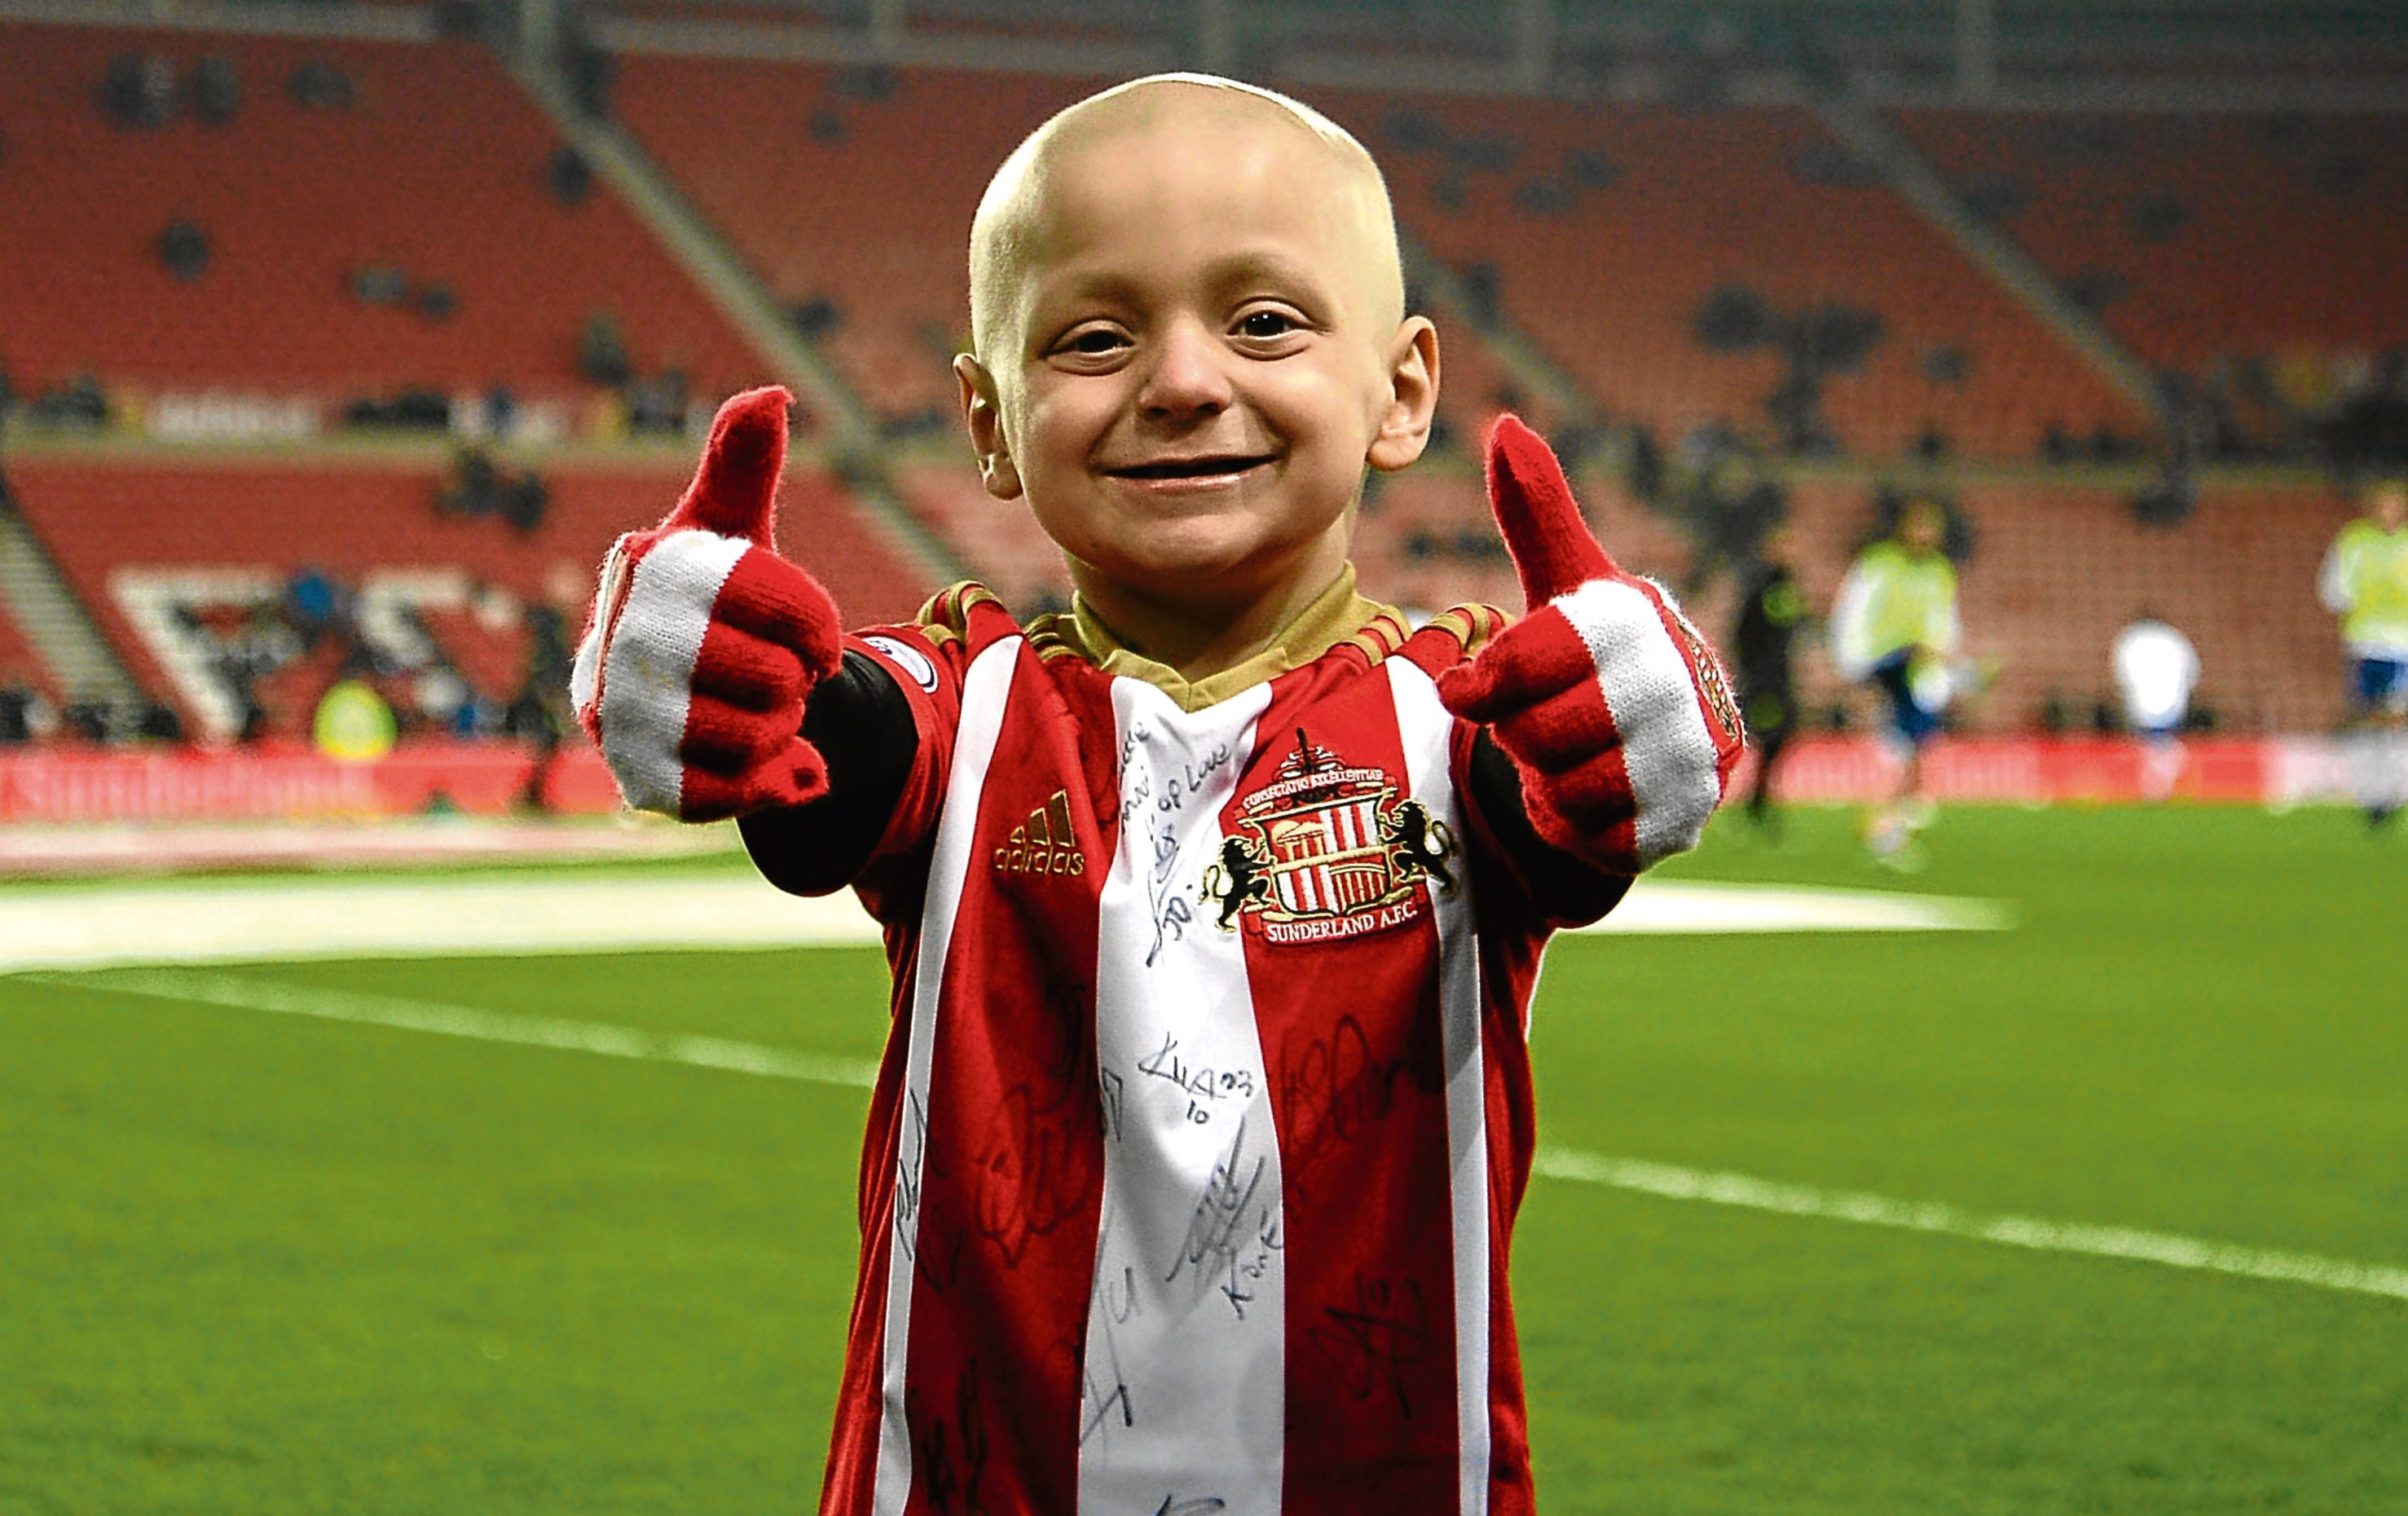 Wee Bradley’s thumbs-up for the thousands who sent him cards (PA)